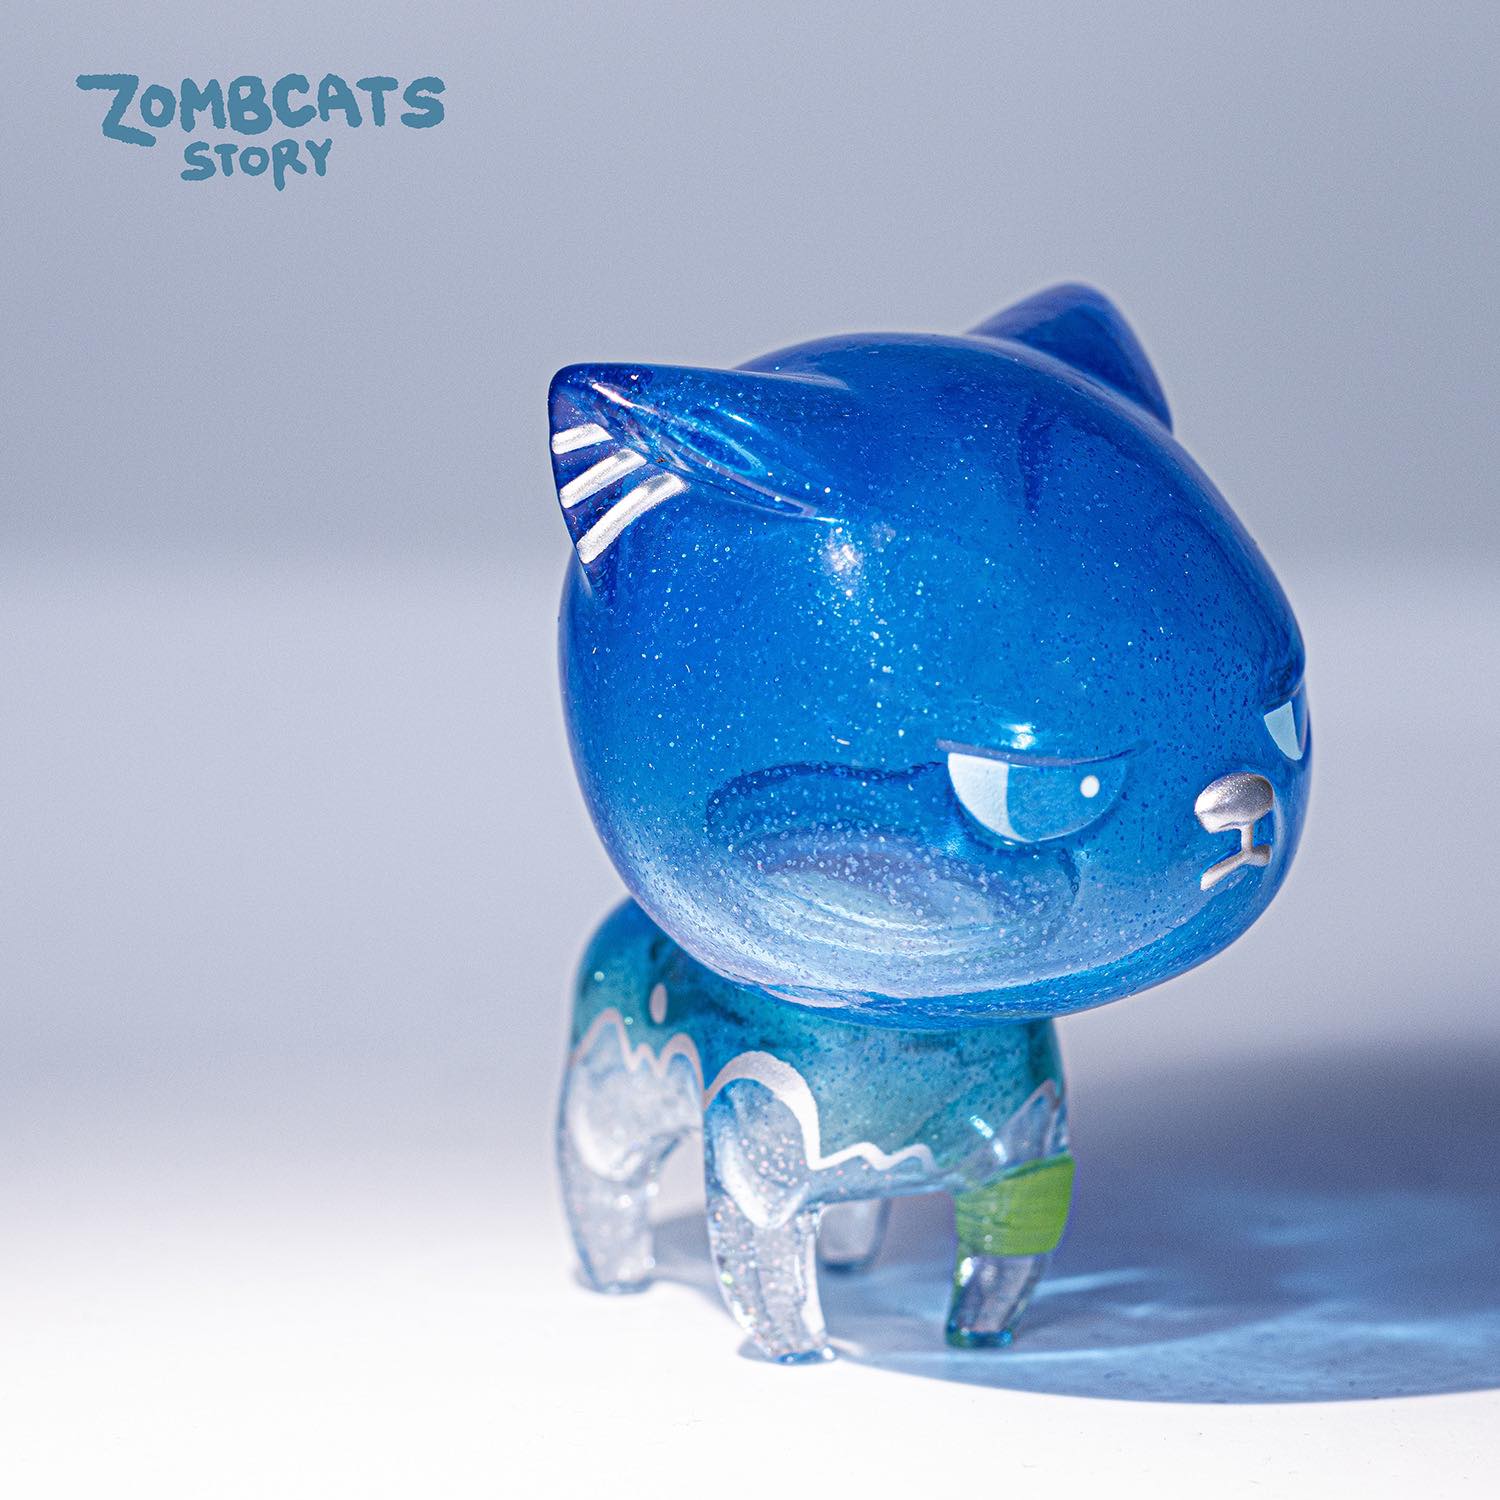 Season of Oceans - Pacific Zombcat Story by Morimei